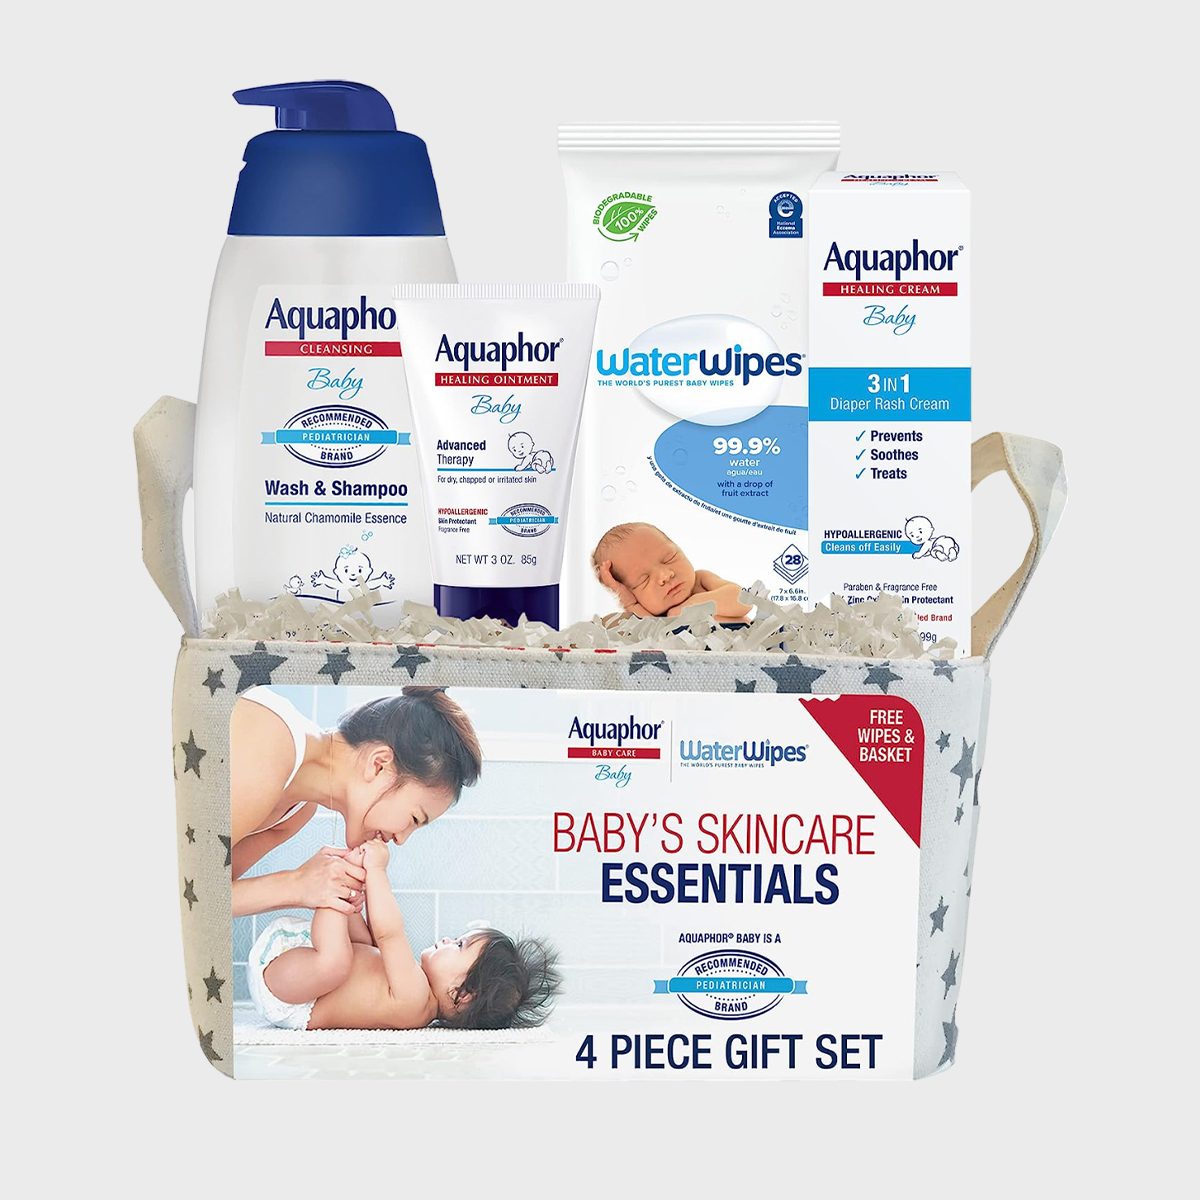 <p>This thoughtful <a href="https://www.amazon.com/Aquaphor-Baby-Welcome-Gift-Set/dp/B07PF7MBMG/" rel="nofollow noopener noreferrer">Aquaphor gift set</a>, the company that makes <a href="https://www.rd.com/list/hand-creams-with-nearly-perfect-reviews/" rel="noopener noreferrer">hand creams</a> with nearly perfect reviews, is brimming with tried-and-true baby skin care products all parents need for their little ones. It includes a package of extra-gentle WaterWipes, a healing ointment, wash and shampoo and 3-in-1 diaper rash cream.</p> <p>It comes pre-packaged in a reusable canvas basket, so it's easy to give, and because it's so incredibly practical you know the items won't go to waste. It's also a <a href="https://www.thehealthy.com/family/childrens-health/baby-products-adults-can-use/" rel="noopener">baby product adults can use</a> and one of Amazon's top baby gifts for a registry with an affordable under $25 price tag.</p> <p class="listicle-page__cta-button-shop"><a class="shop-btn" href="https://www.amazon.com/Aquaphor-Baby-Welcome-Gift-Set/dp/B07PF7MBMG/">Shop Now</a></p>